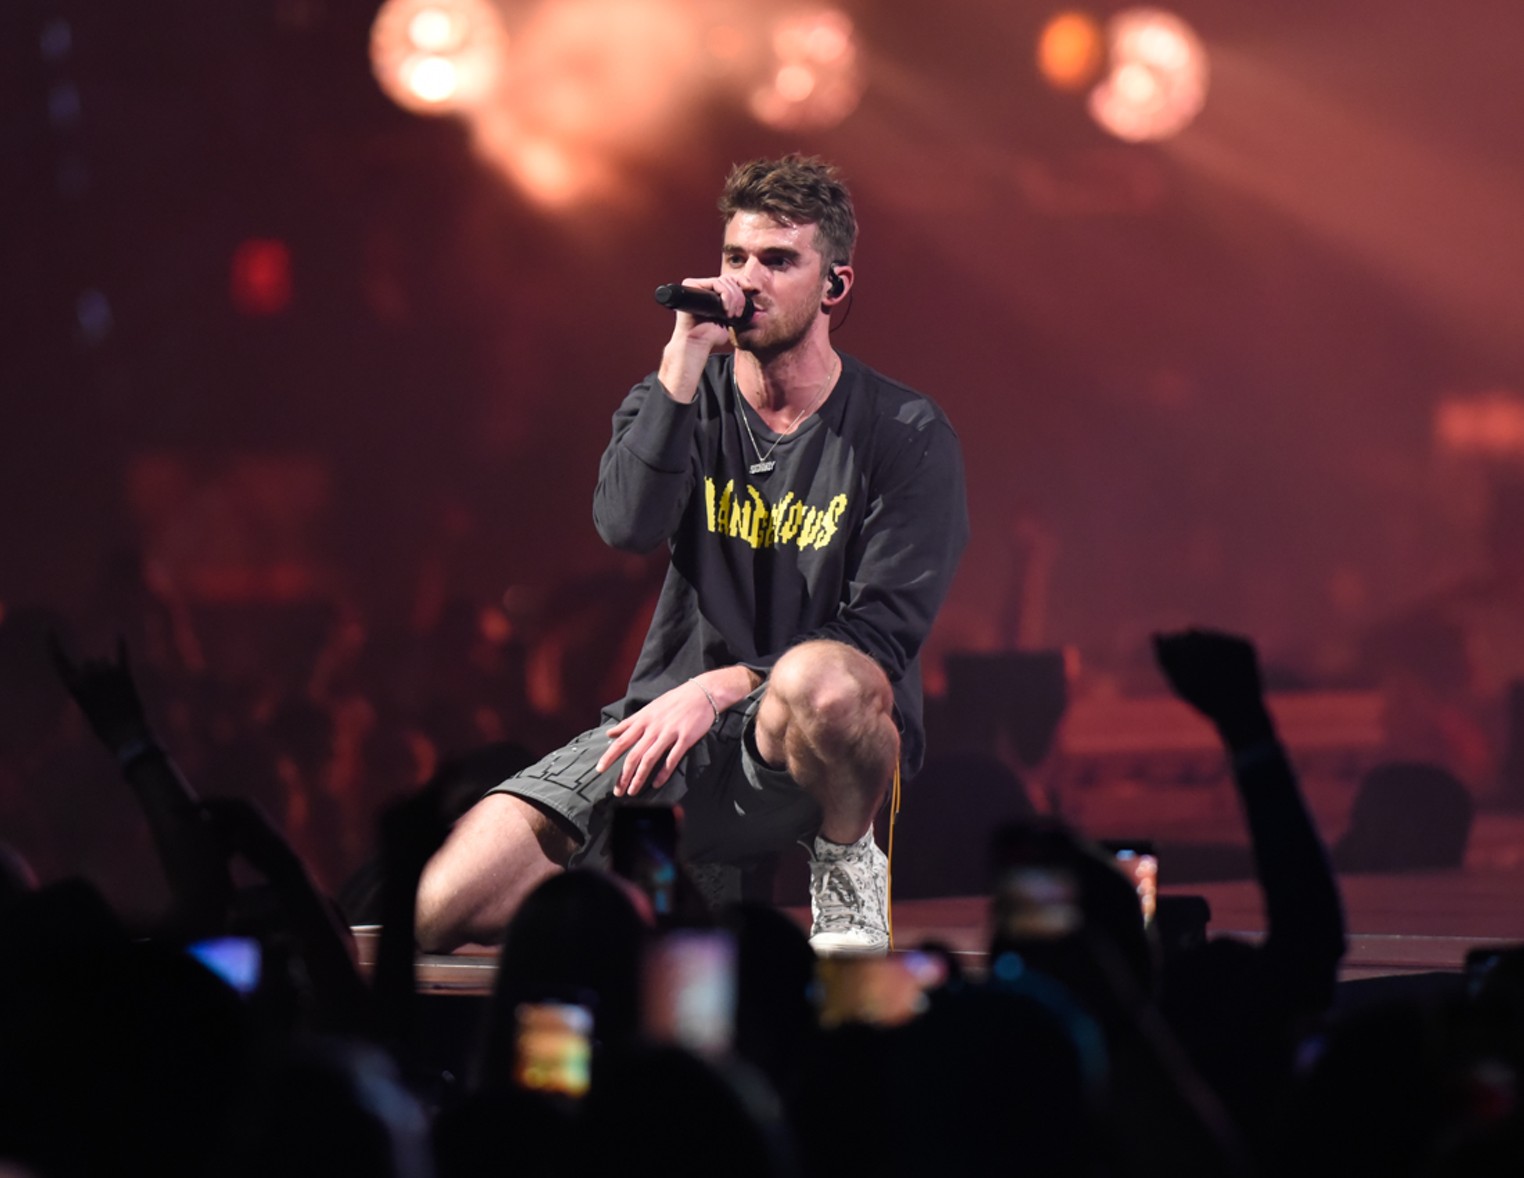 Concert Review: The Chainsmokers World War Joy Tour at American